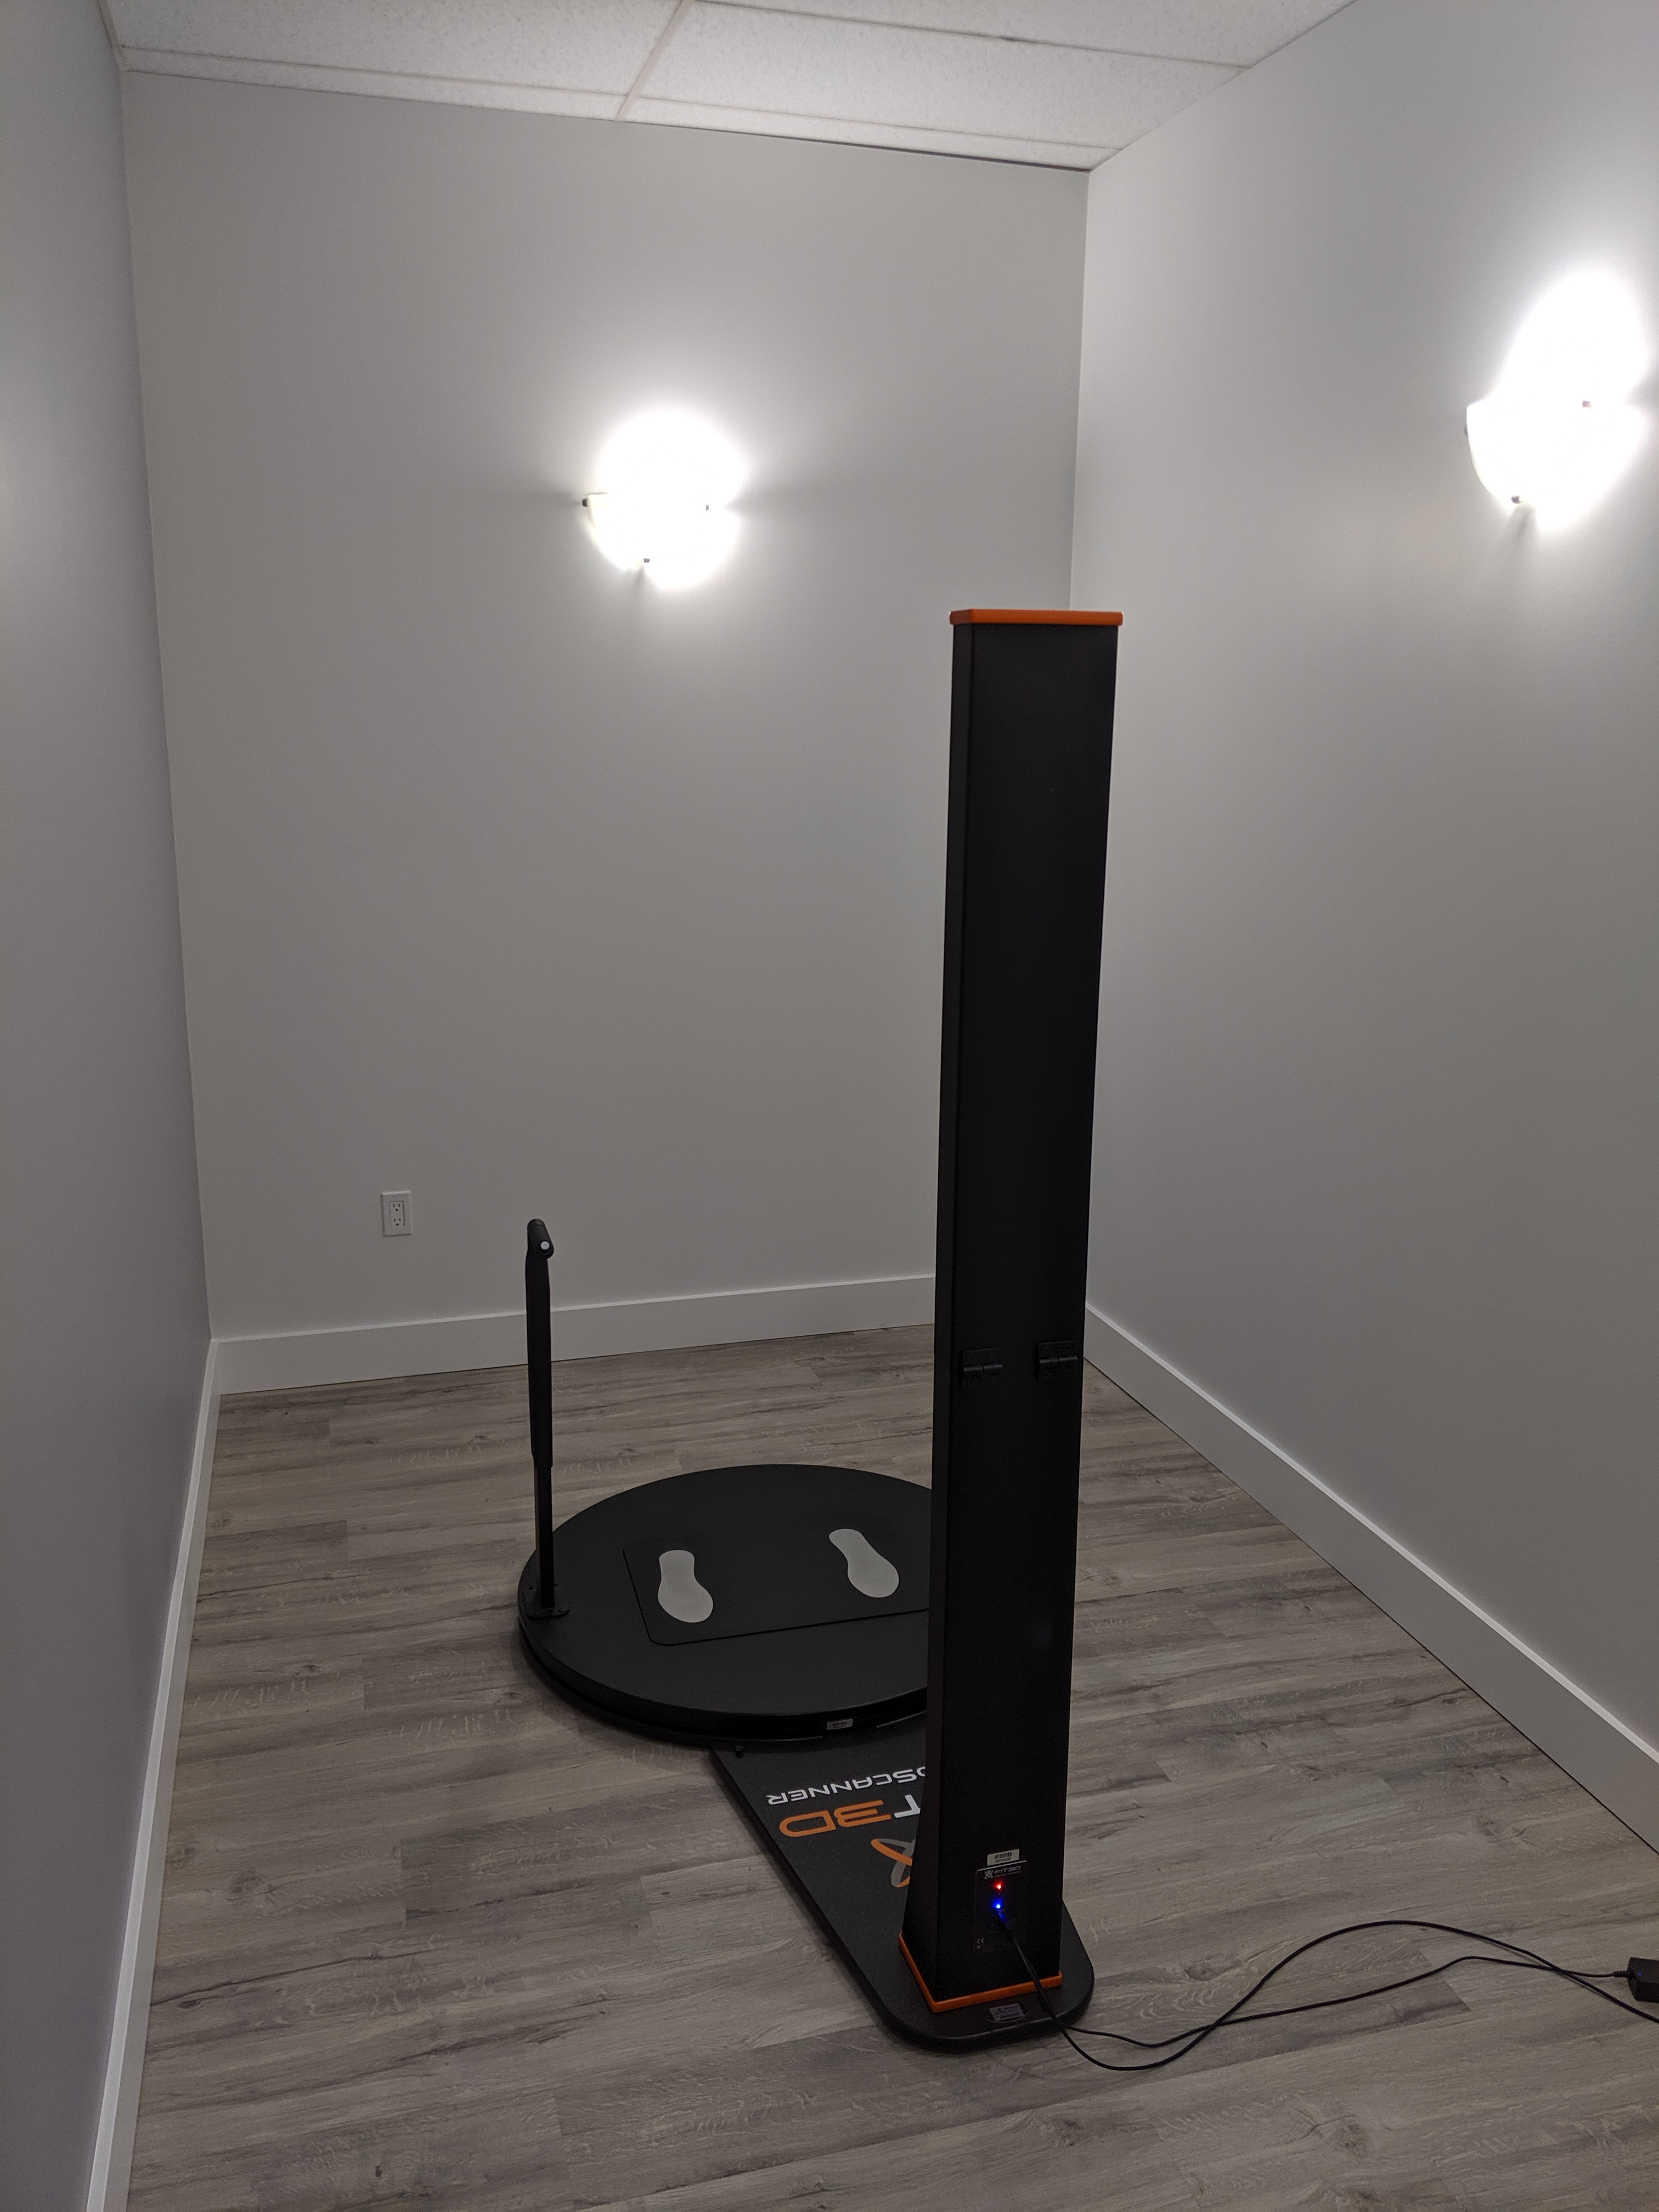 Fit3D scanning room from the user's point of view